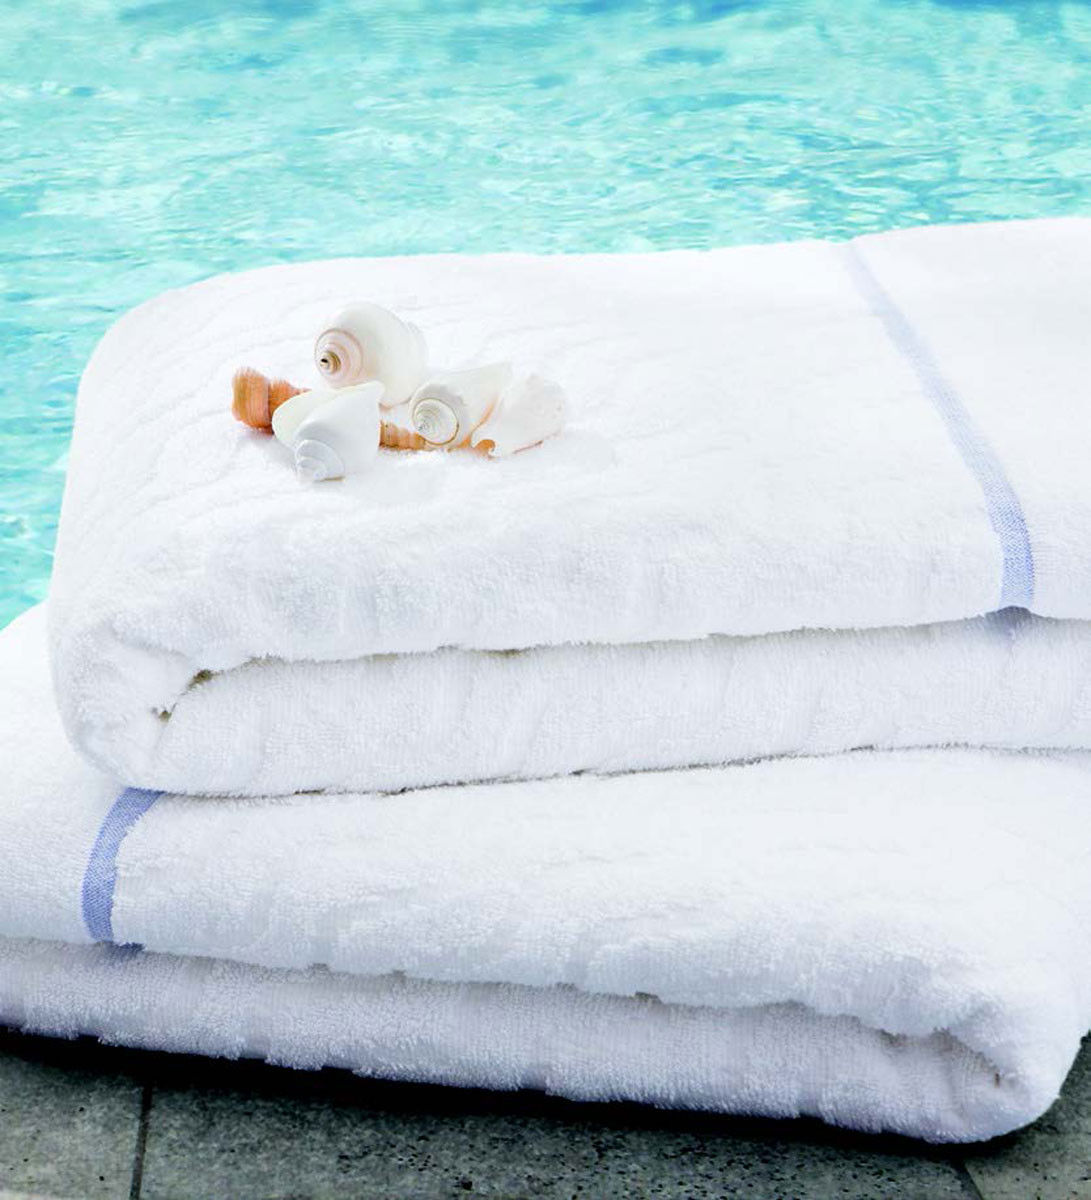 What is the preparation process for EuroSpa towels before they reach you?